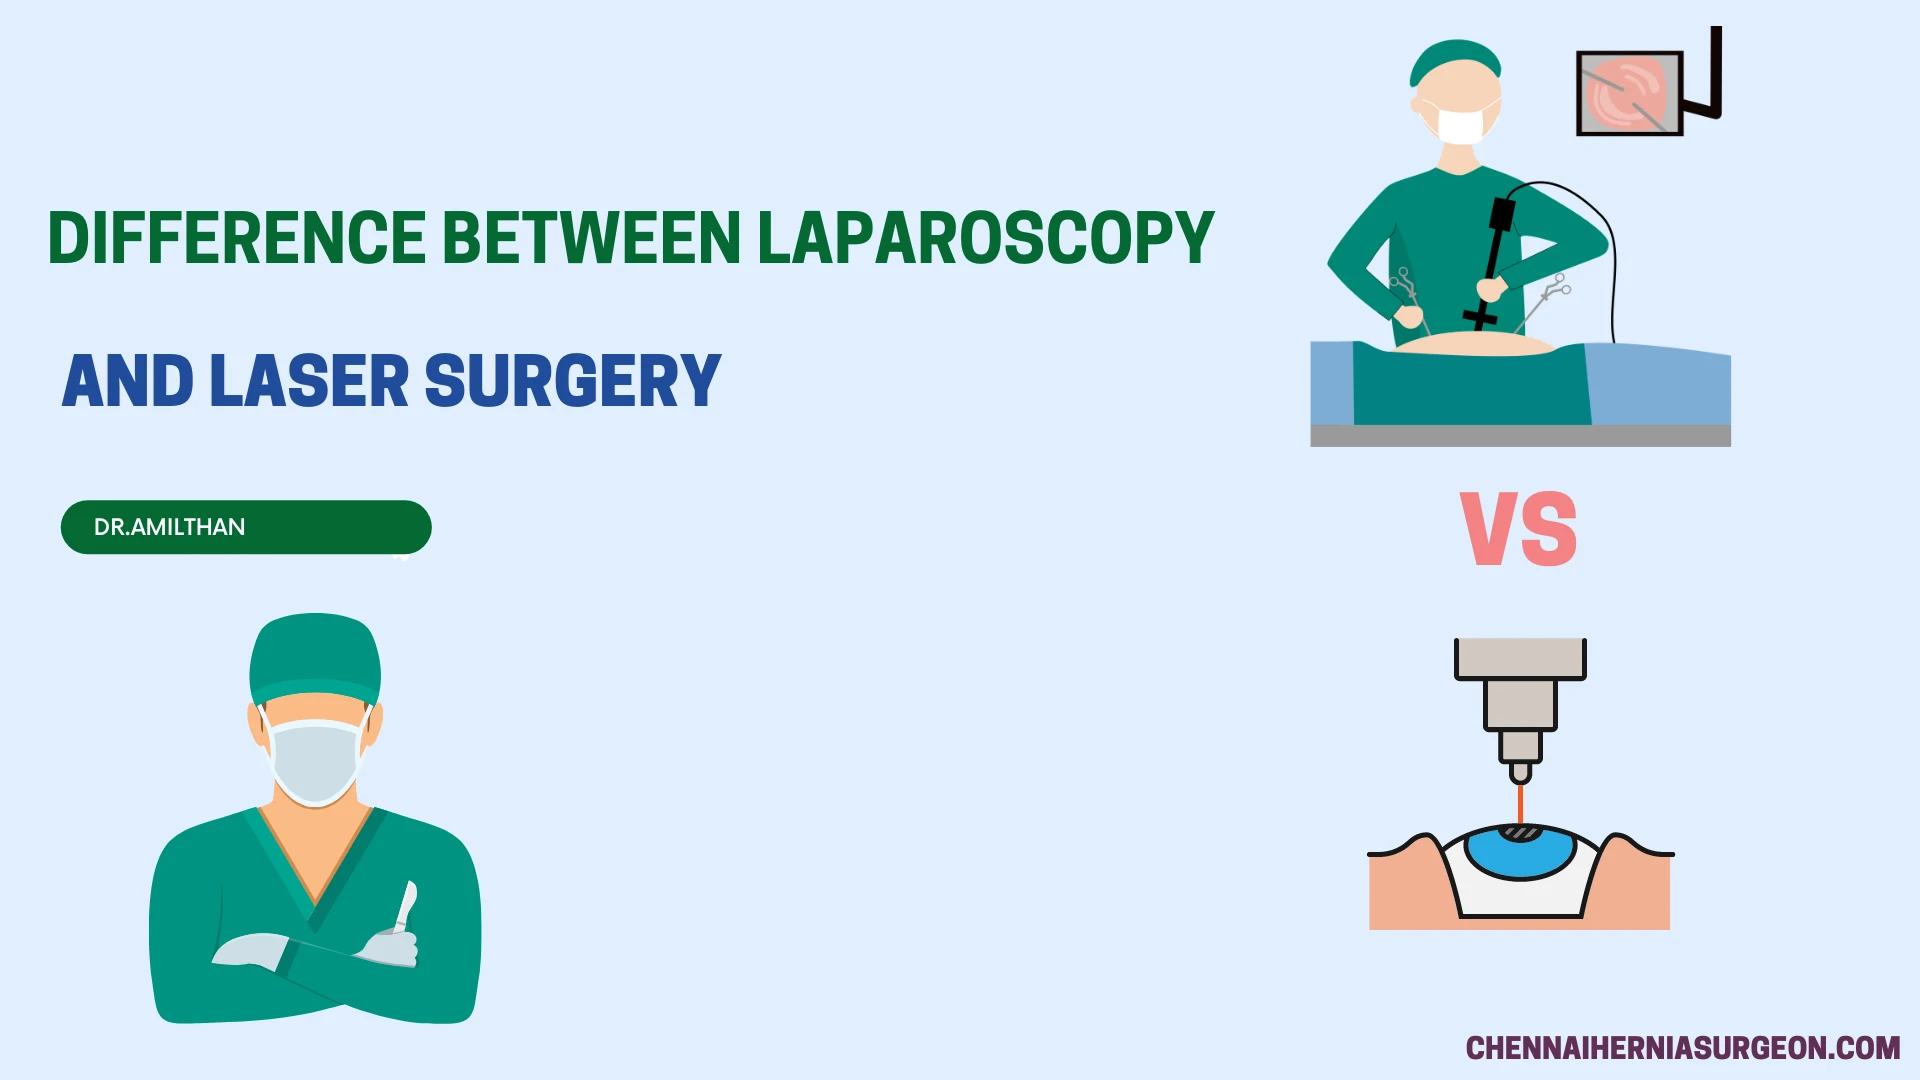 Difference between Laparoscopy and Laser surgery